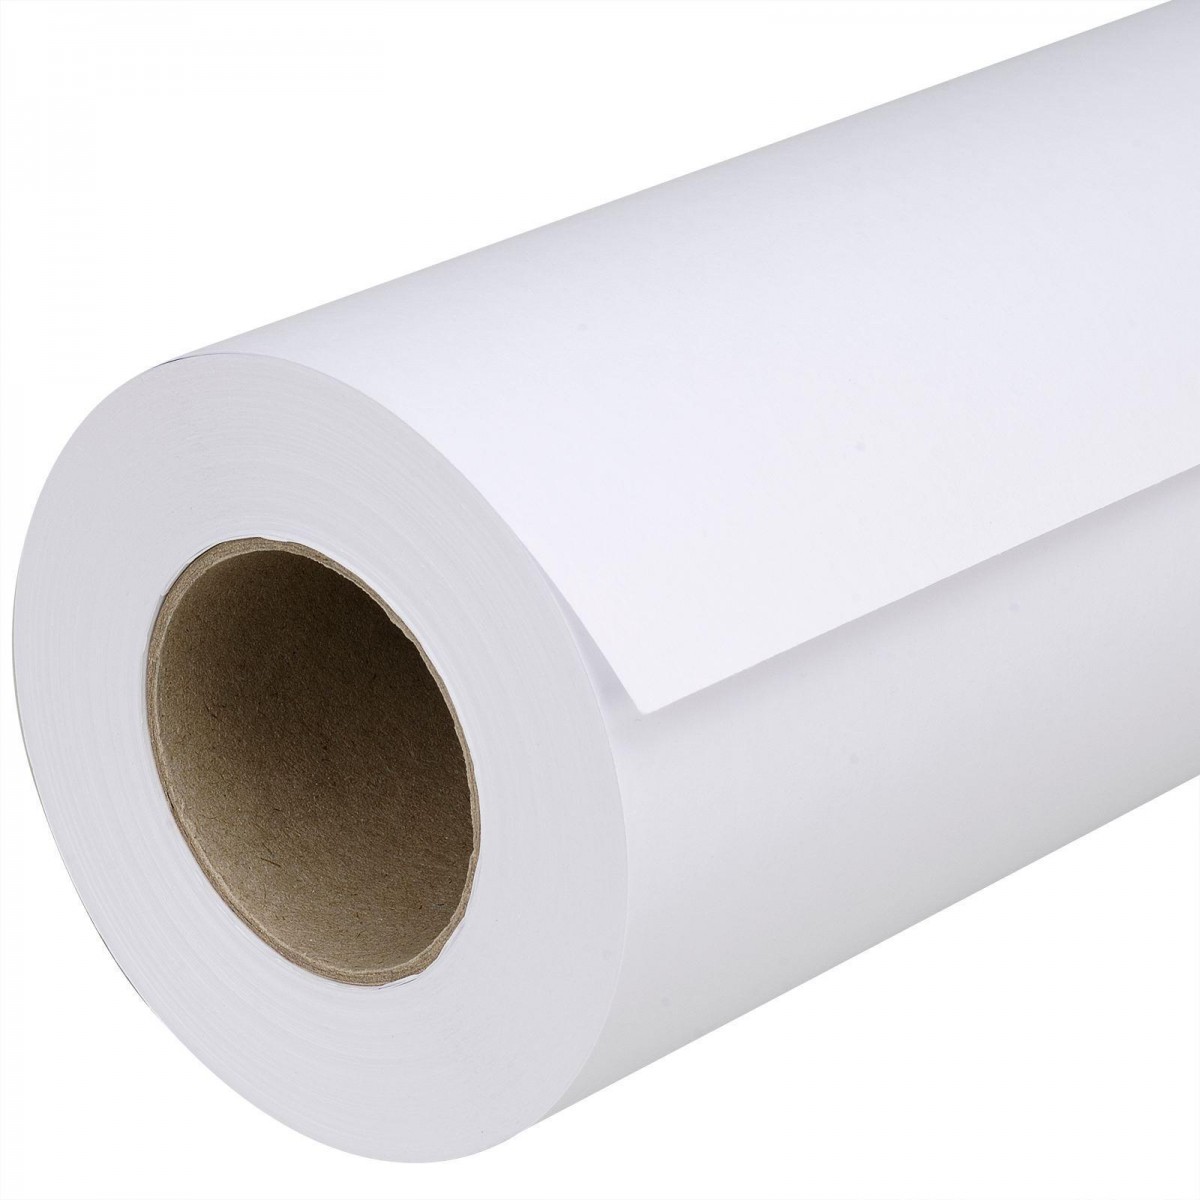 sublimation transfer paper roll, SUBLIMATION TRANSFER PAPER